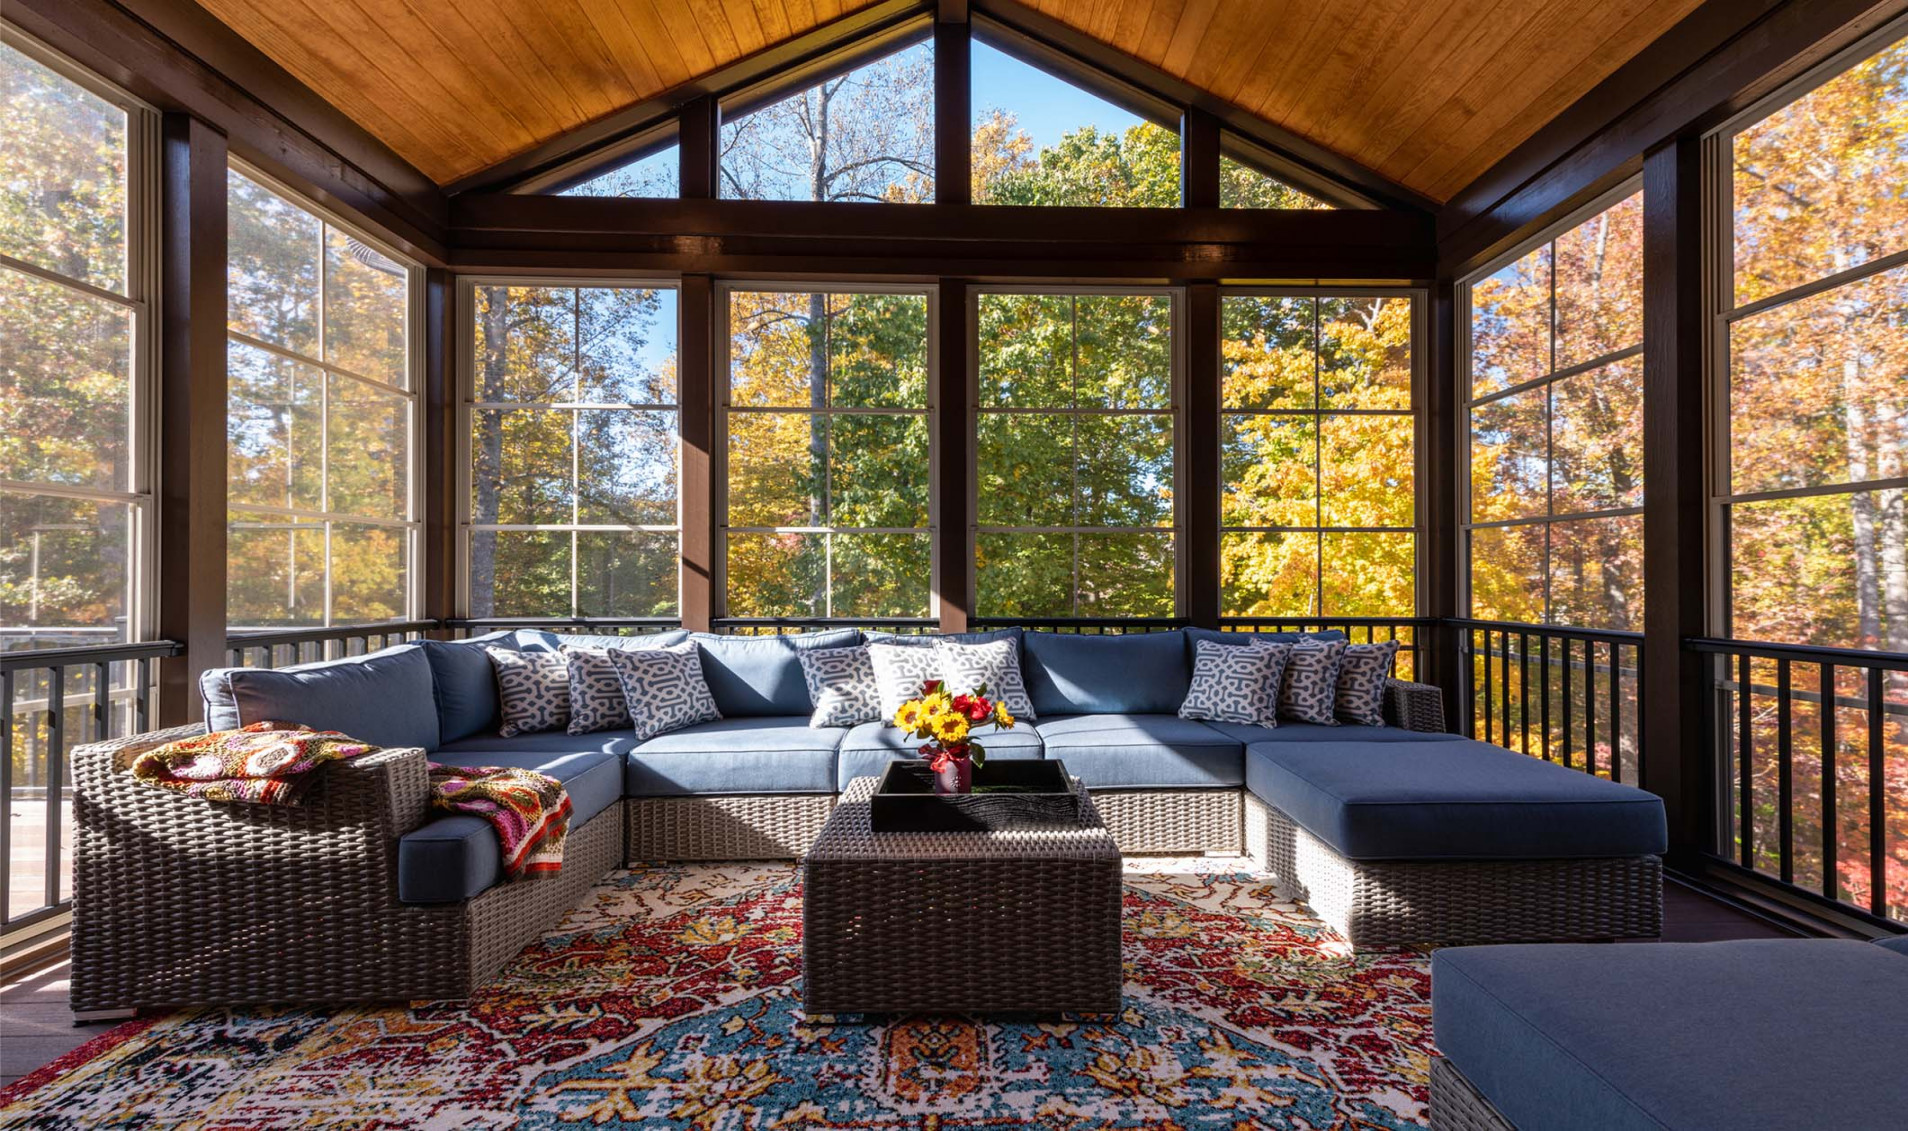 How Much Does a Screened-In Porch Cost? () - Bob Vila